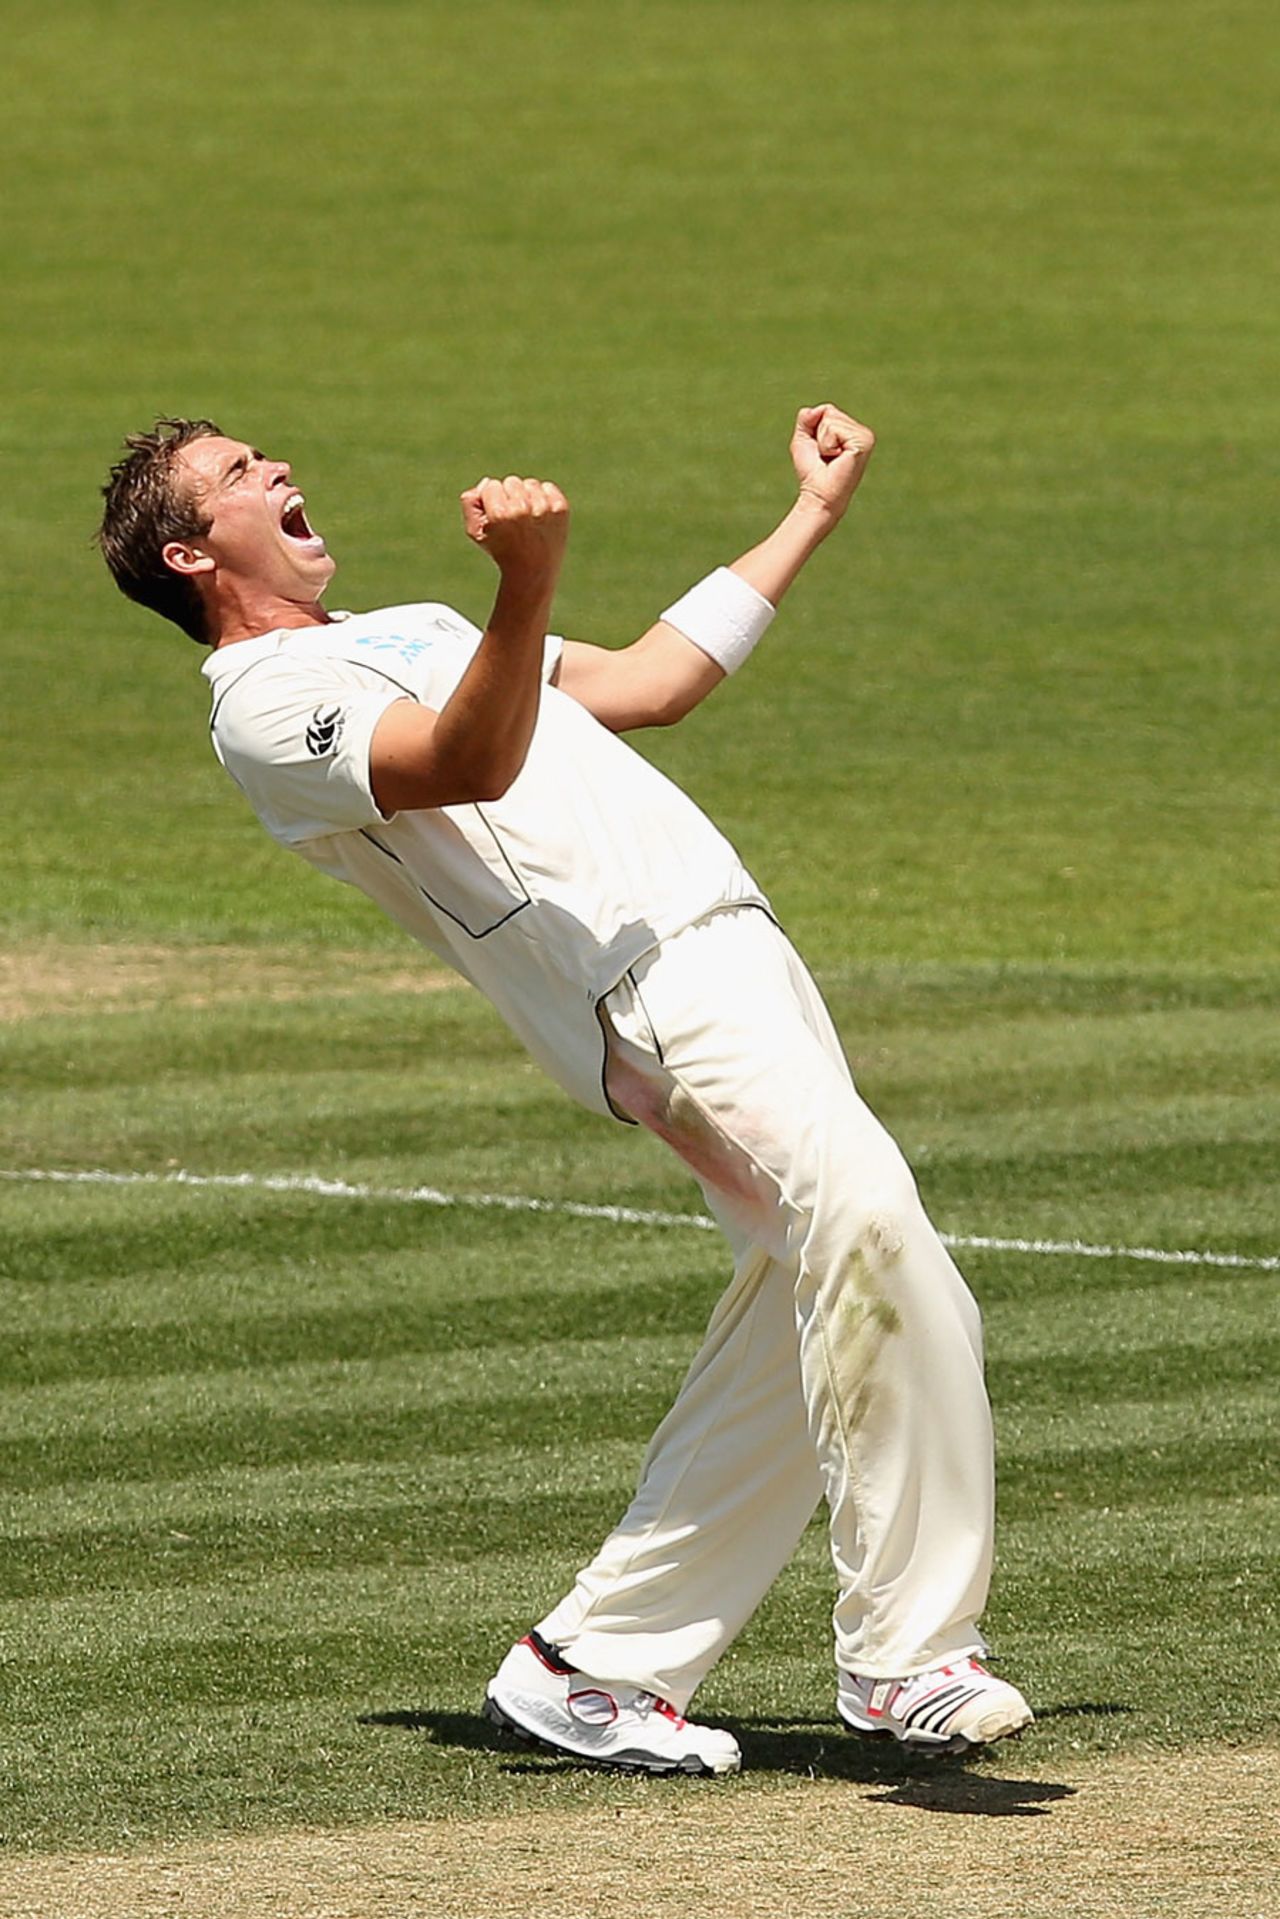 Tim Southee roars after New Zealand pick up the final wicket, Australia v New Zealand, 2nd Test, Hobart, 4th day, December 12 2011